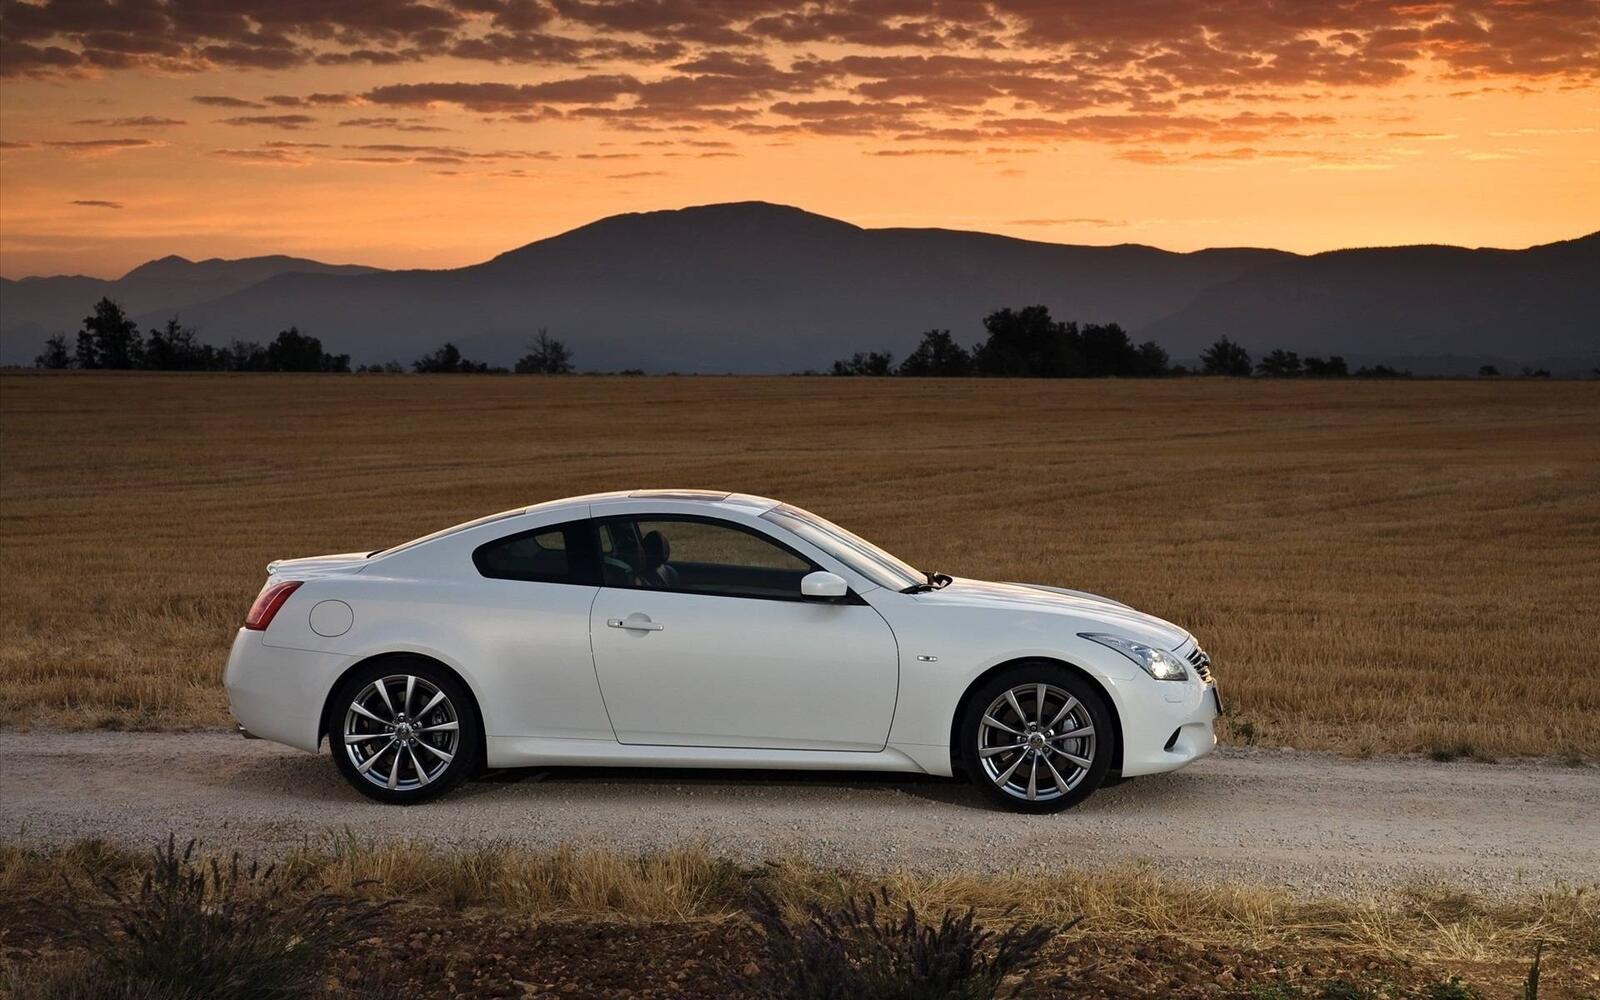 Wallpapers Infiniti Coupe white on the desktop